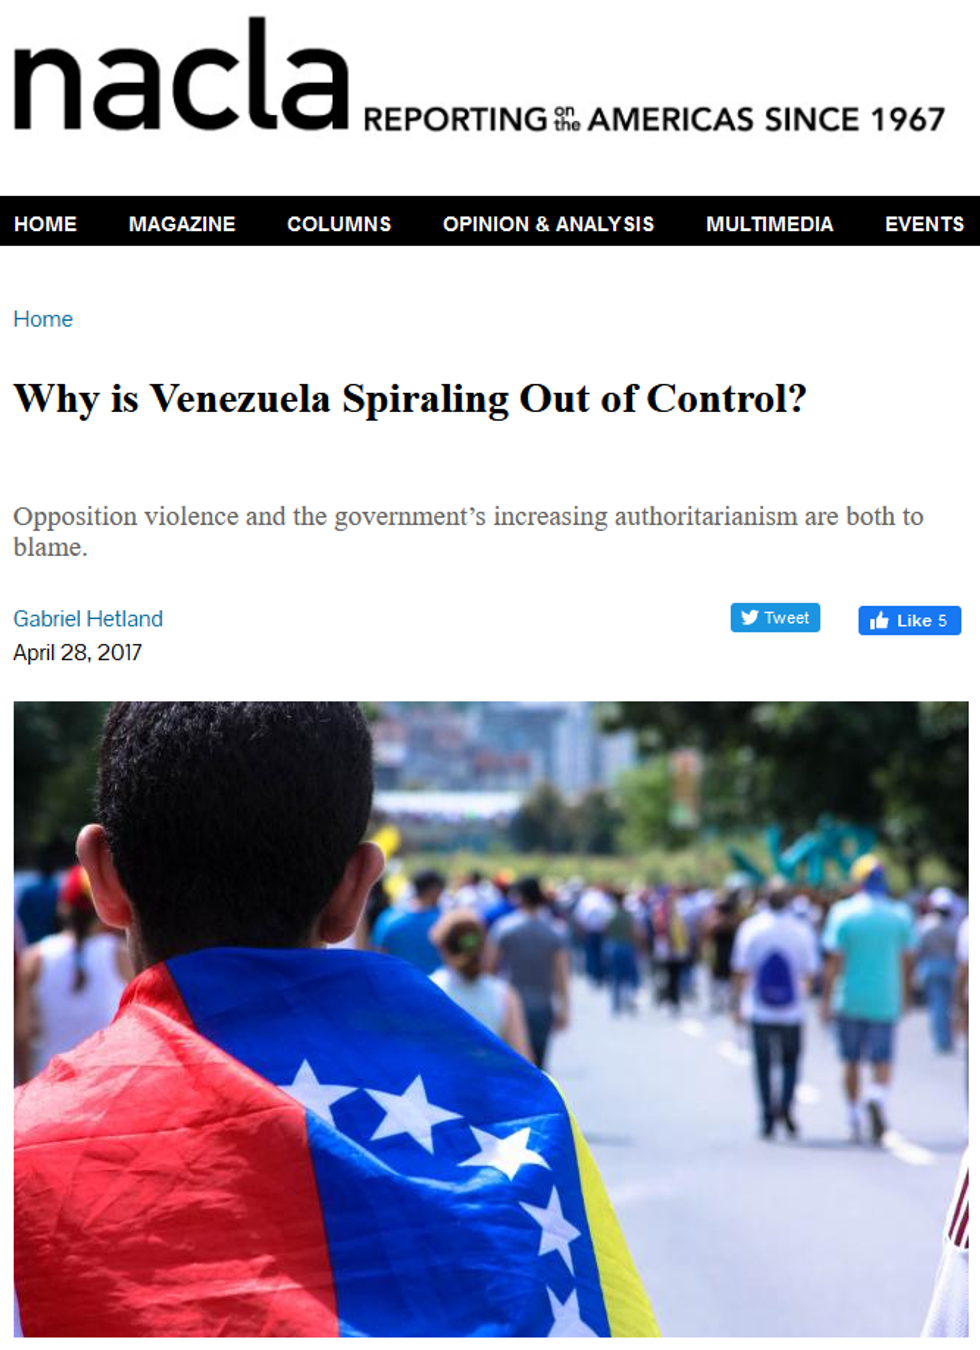 NACLA: Why is Venezuela Spiraling Out of Control?